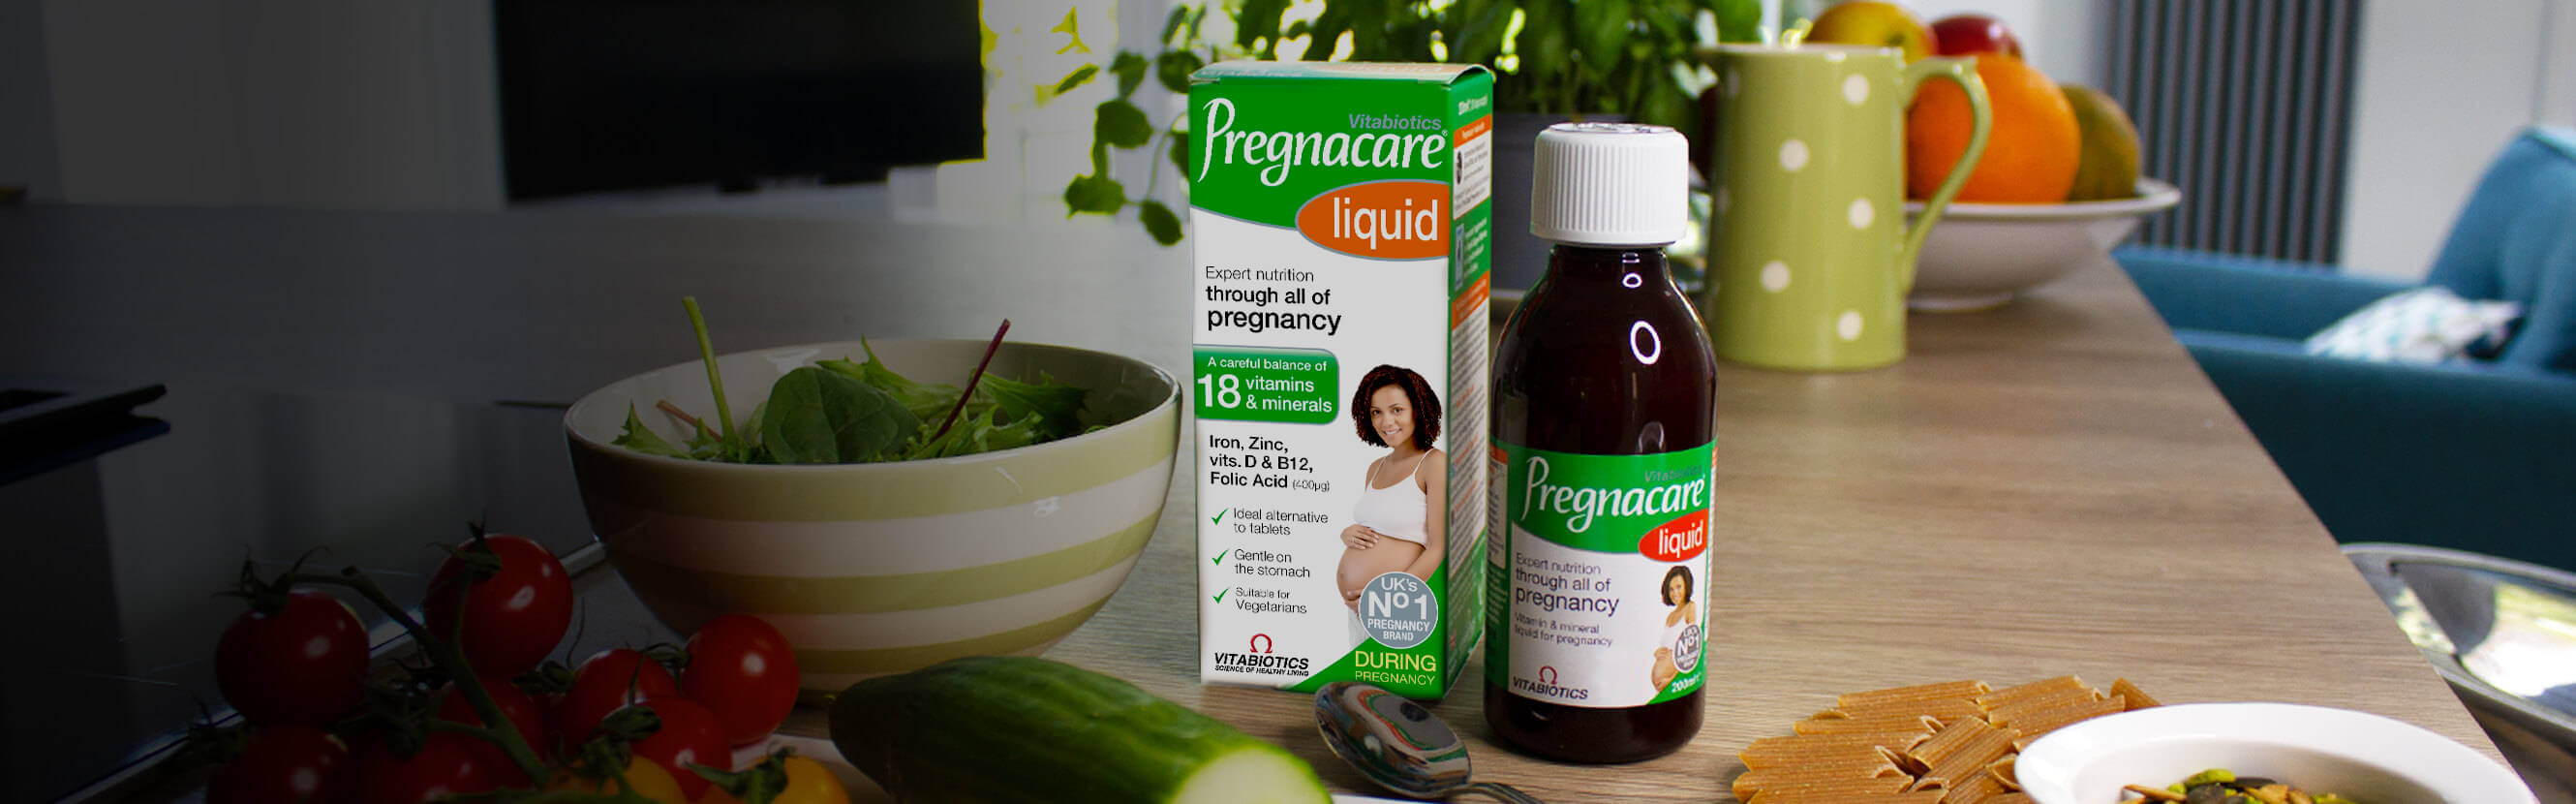  Difficulty taking tablets shouldn’t get in the way of nutritional support when it matters most. With Pregnacare Liquid, the trusted nutritional support of Pregnacare is available in a gentle liquid – so you can safeguard your diet in a way that suits you.  